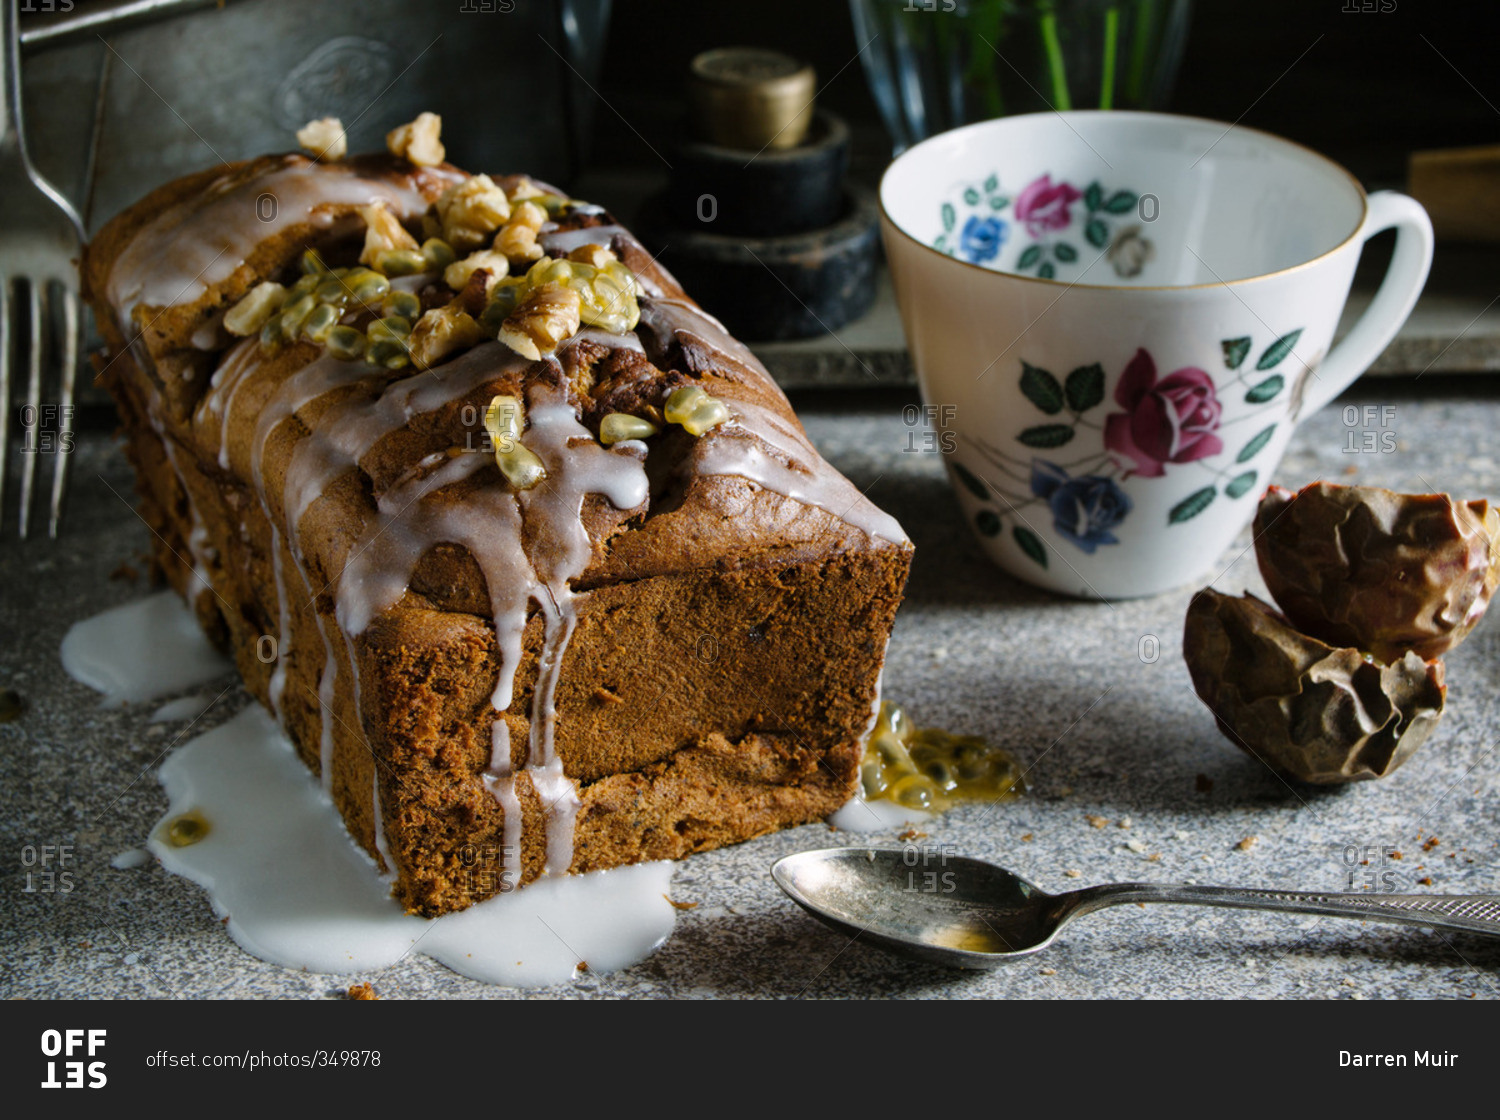 Banana walnut and passion fruit bread with a floral teacup